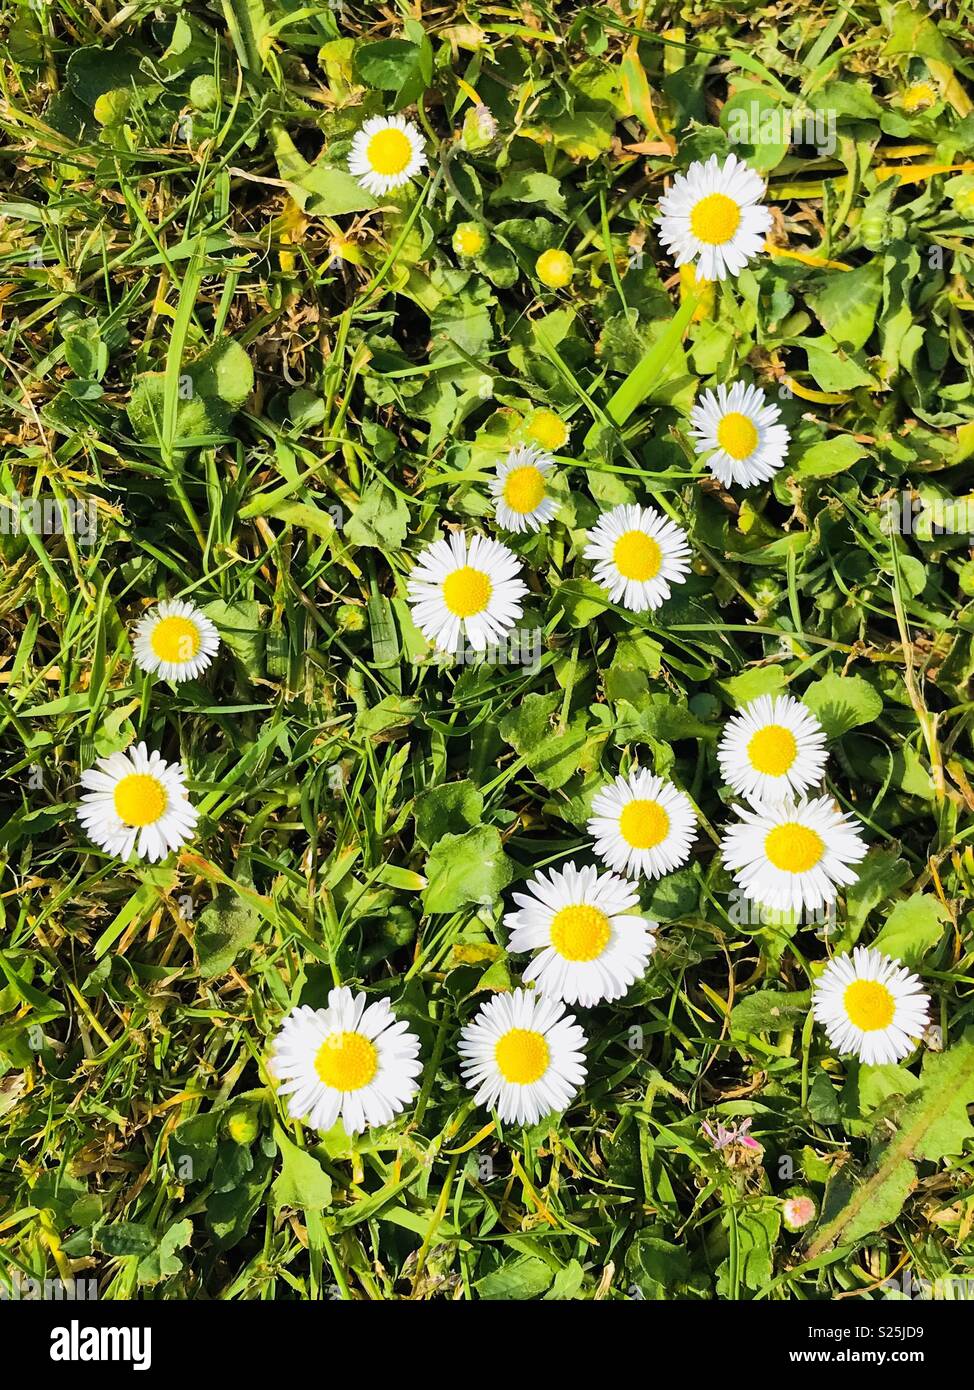 Daisy’s on the grass in garden, birds eye view shot, looking down, bright colours Stock Photo